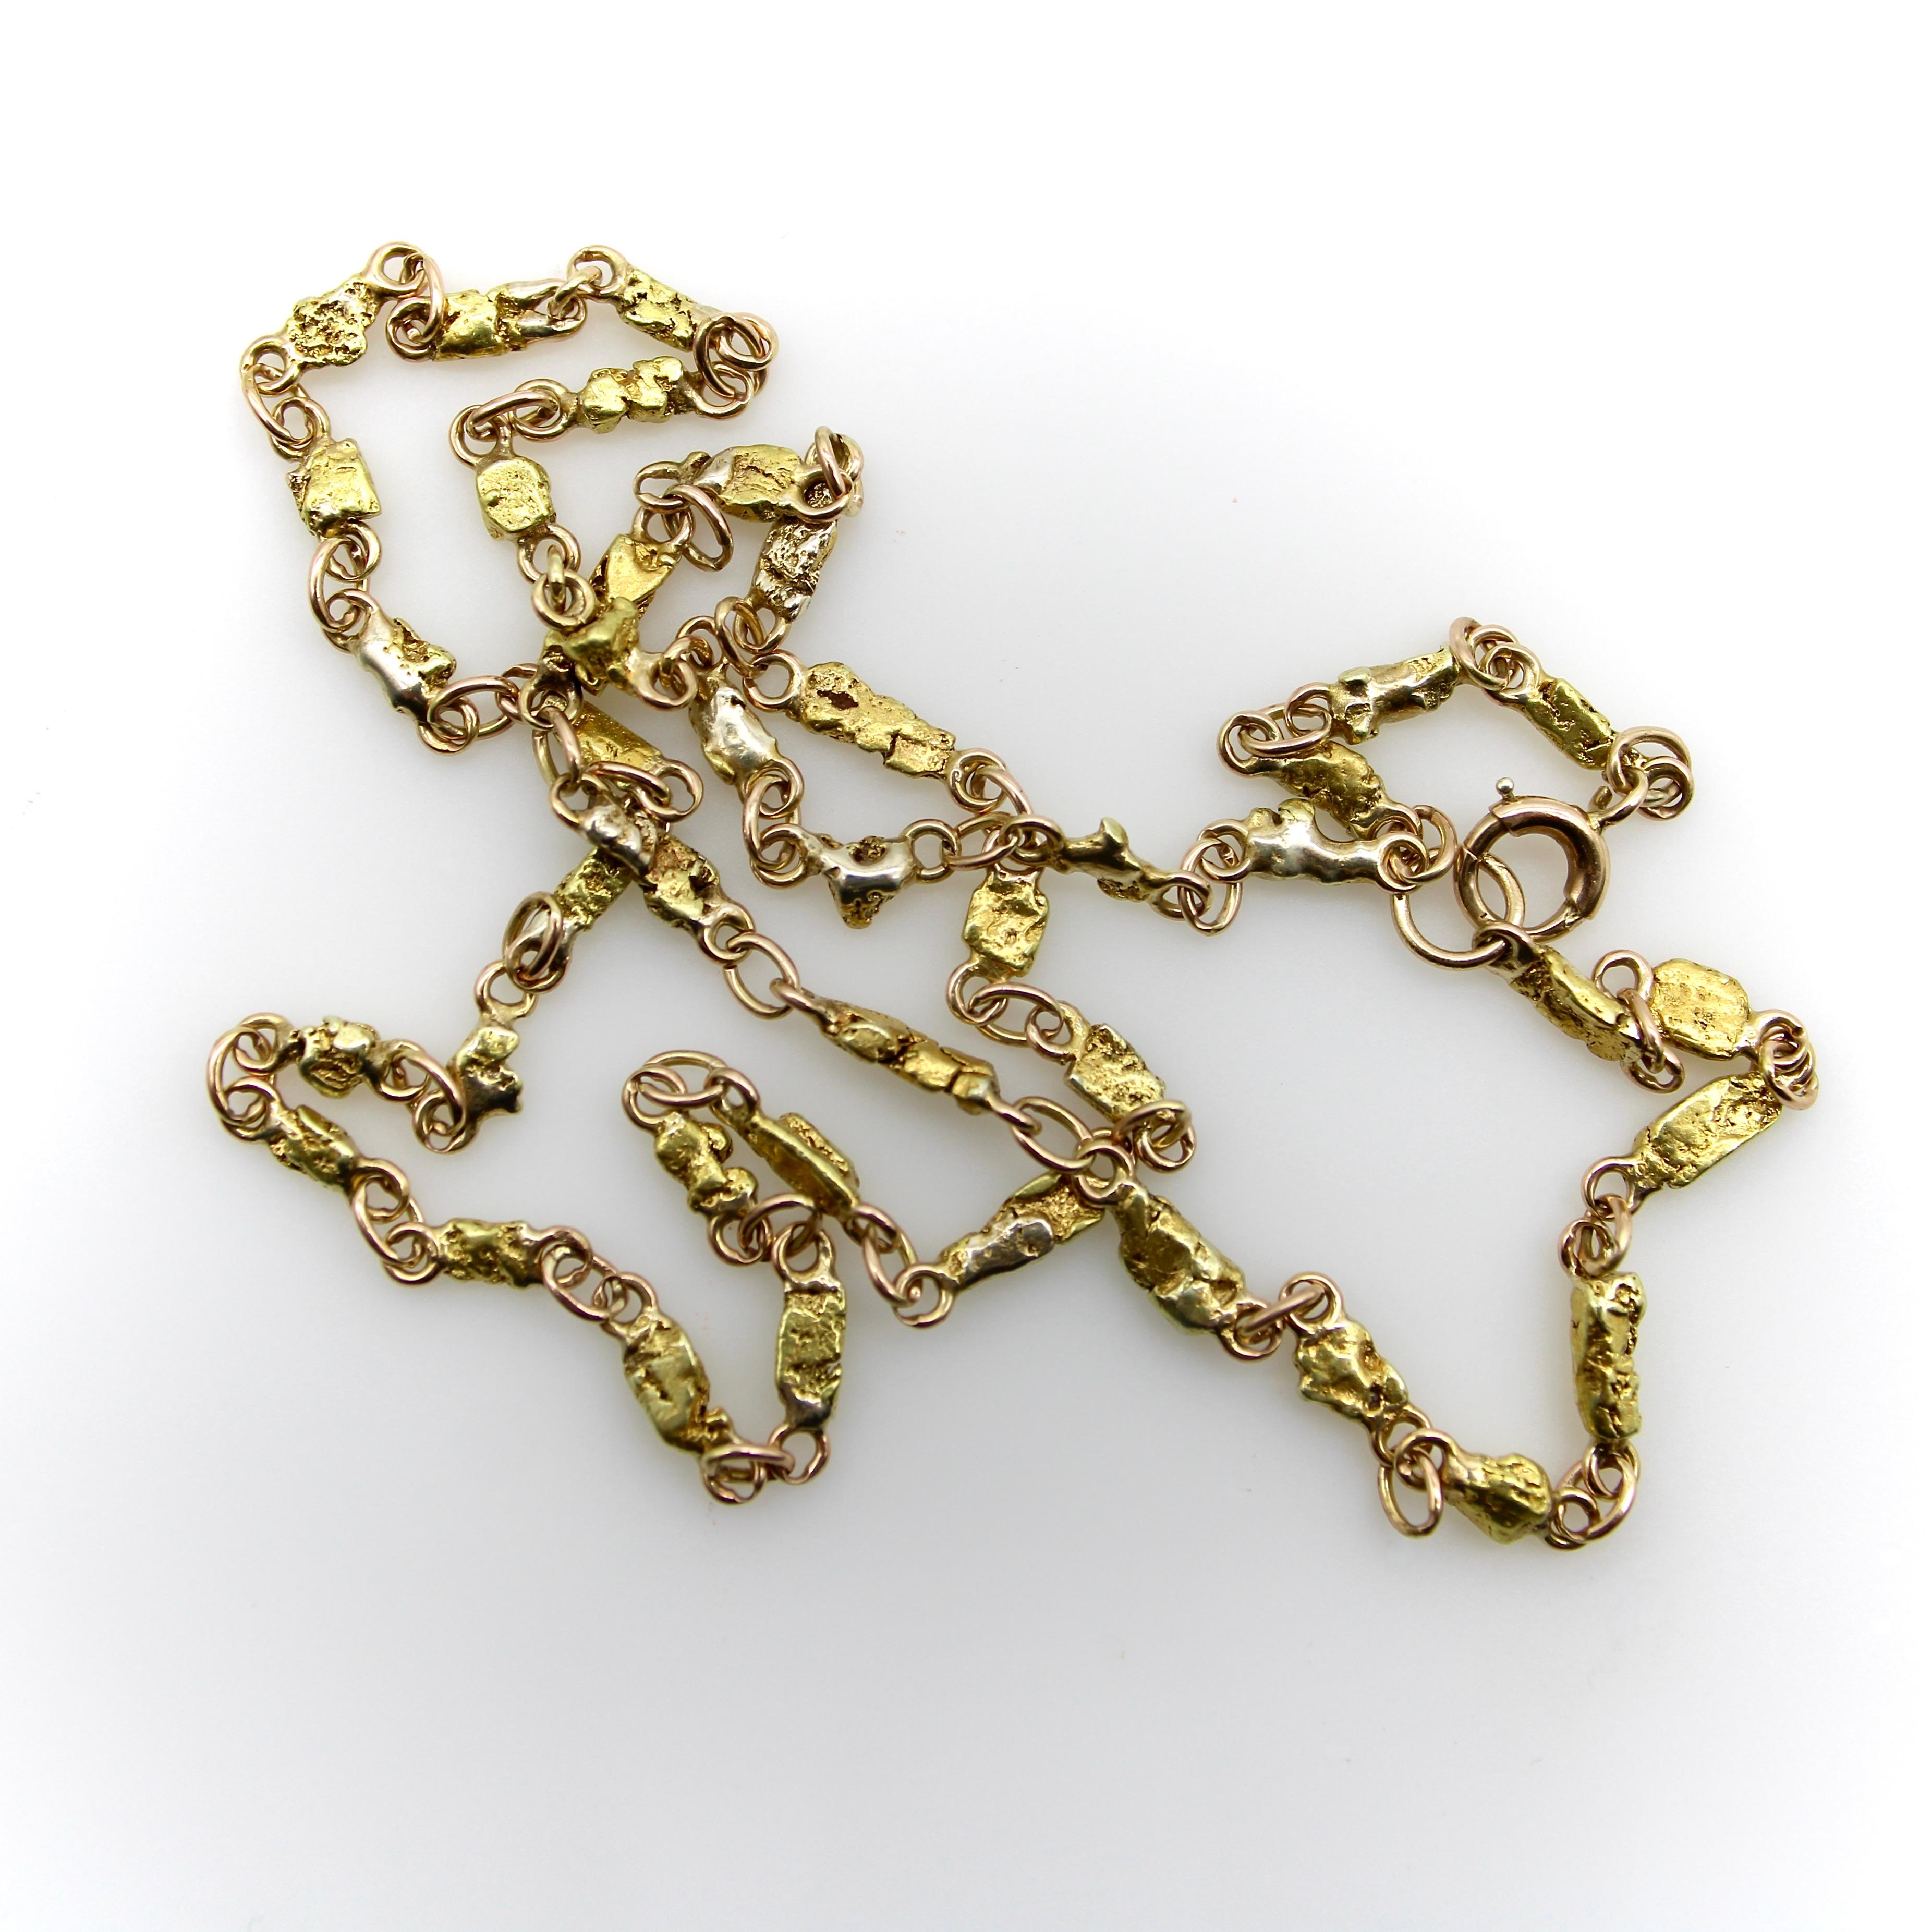 This is a delicately crafted gold nugget chain, most likely from the Alaskan Gold Rush era around 1910. The chain consists of small, well-matched gold nuggets with elegantly crafted jump rings on either side, held together by oval links. The chain